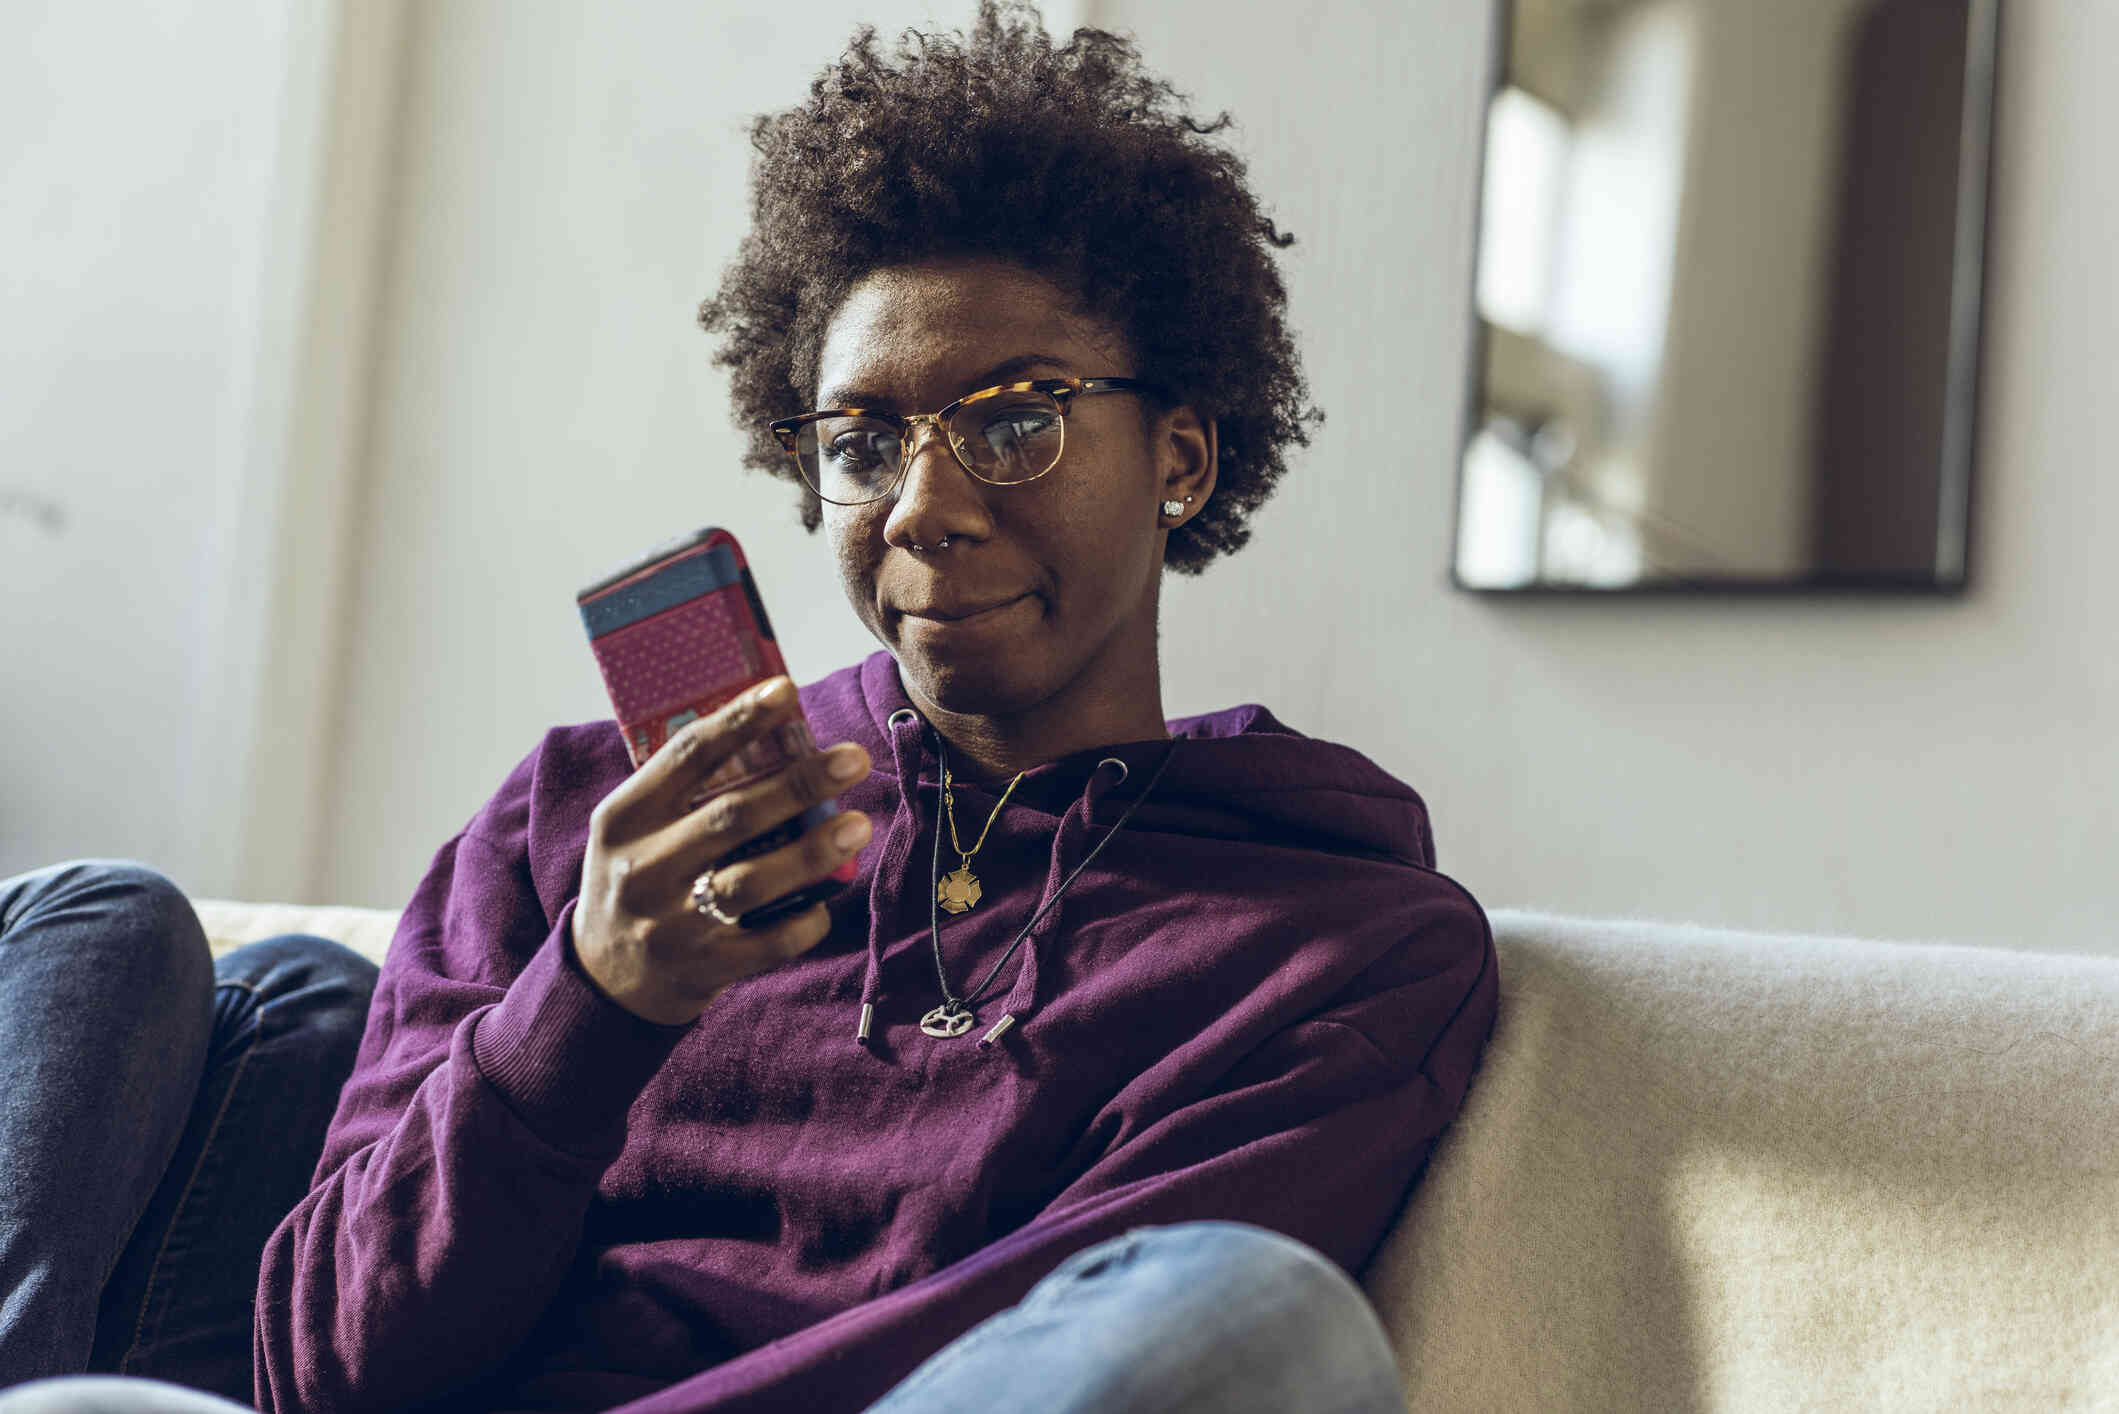 A woman in an purple sweater sits casually on the couch and and looks at the celpphone in her hand.